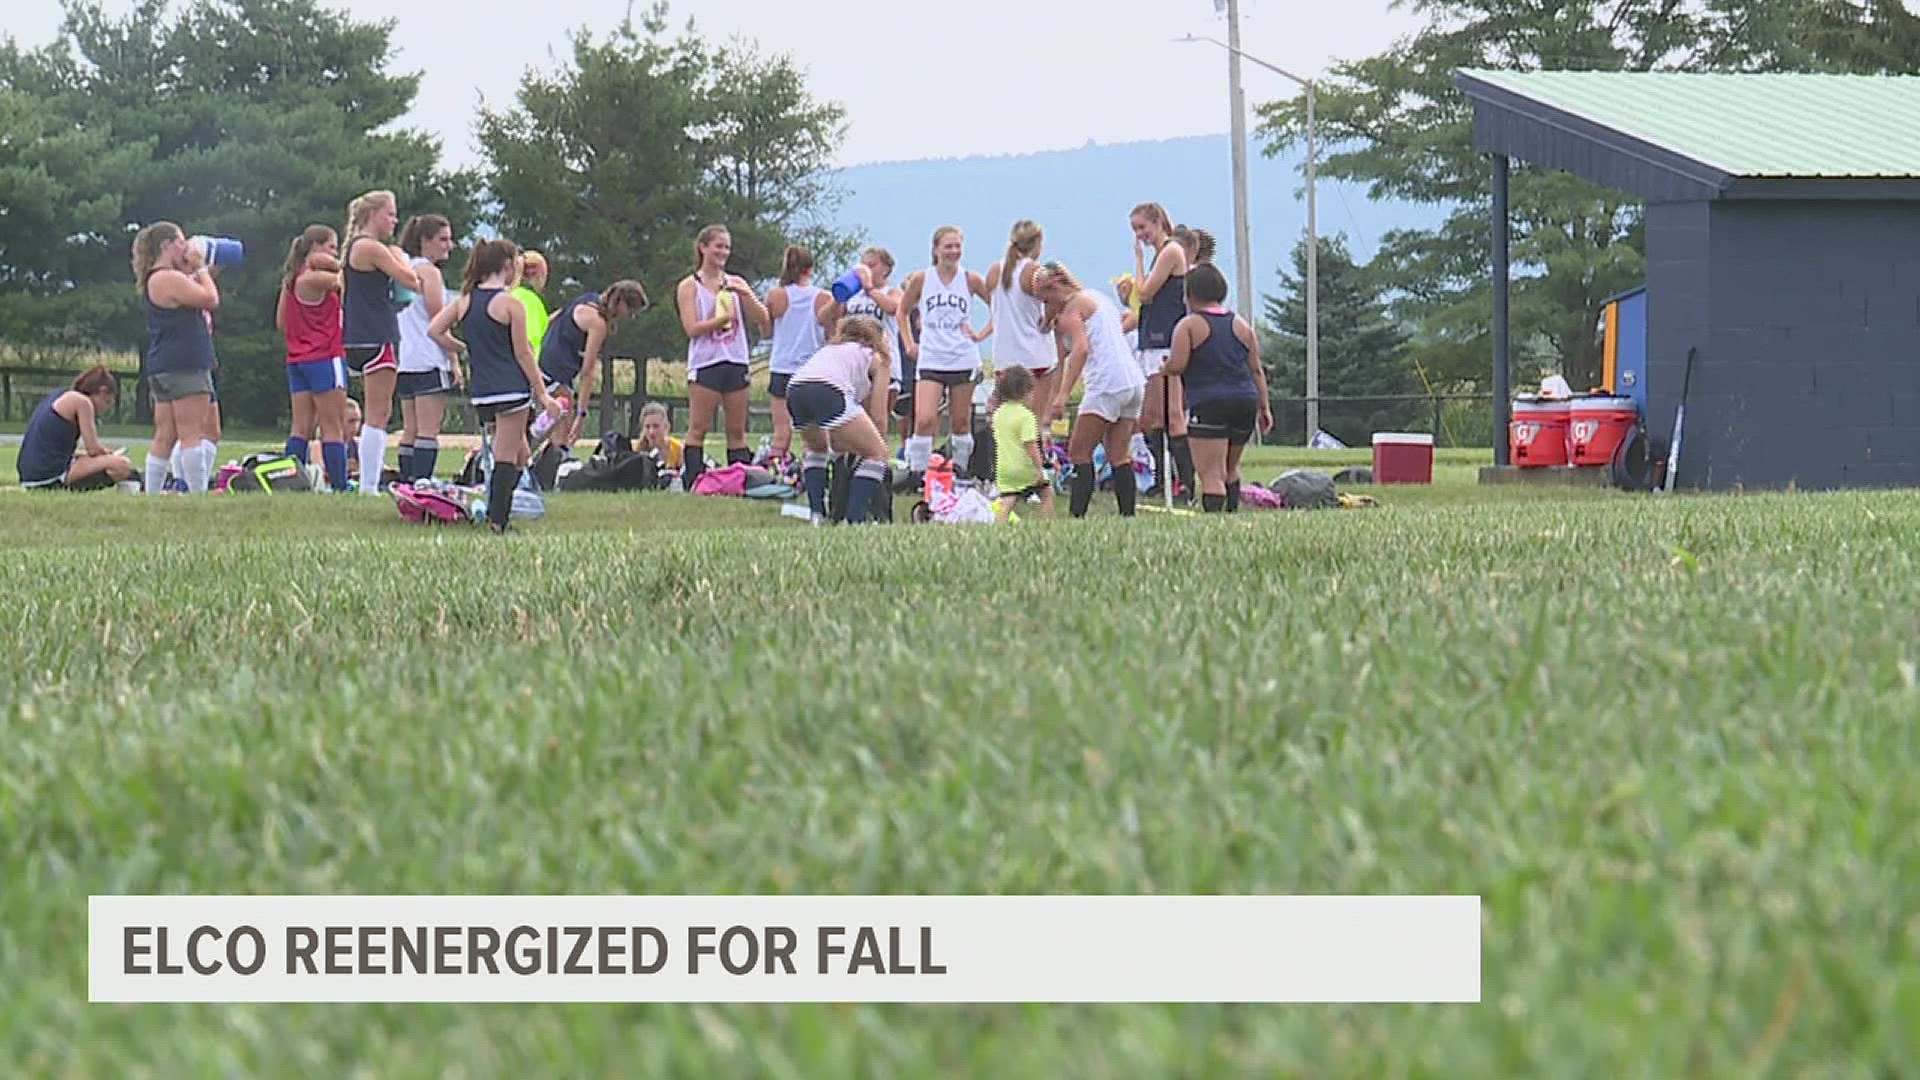 After one of their most successful seasons ever, the Raiders were up bright and early to get ready for a new fall campaign.